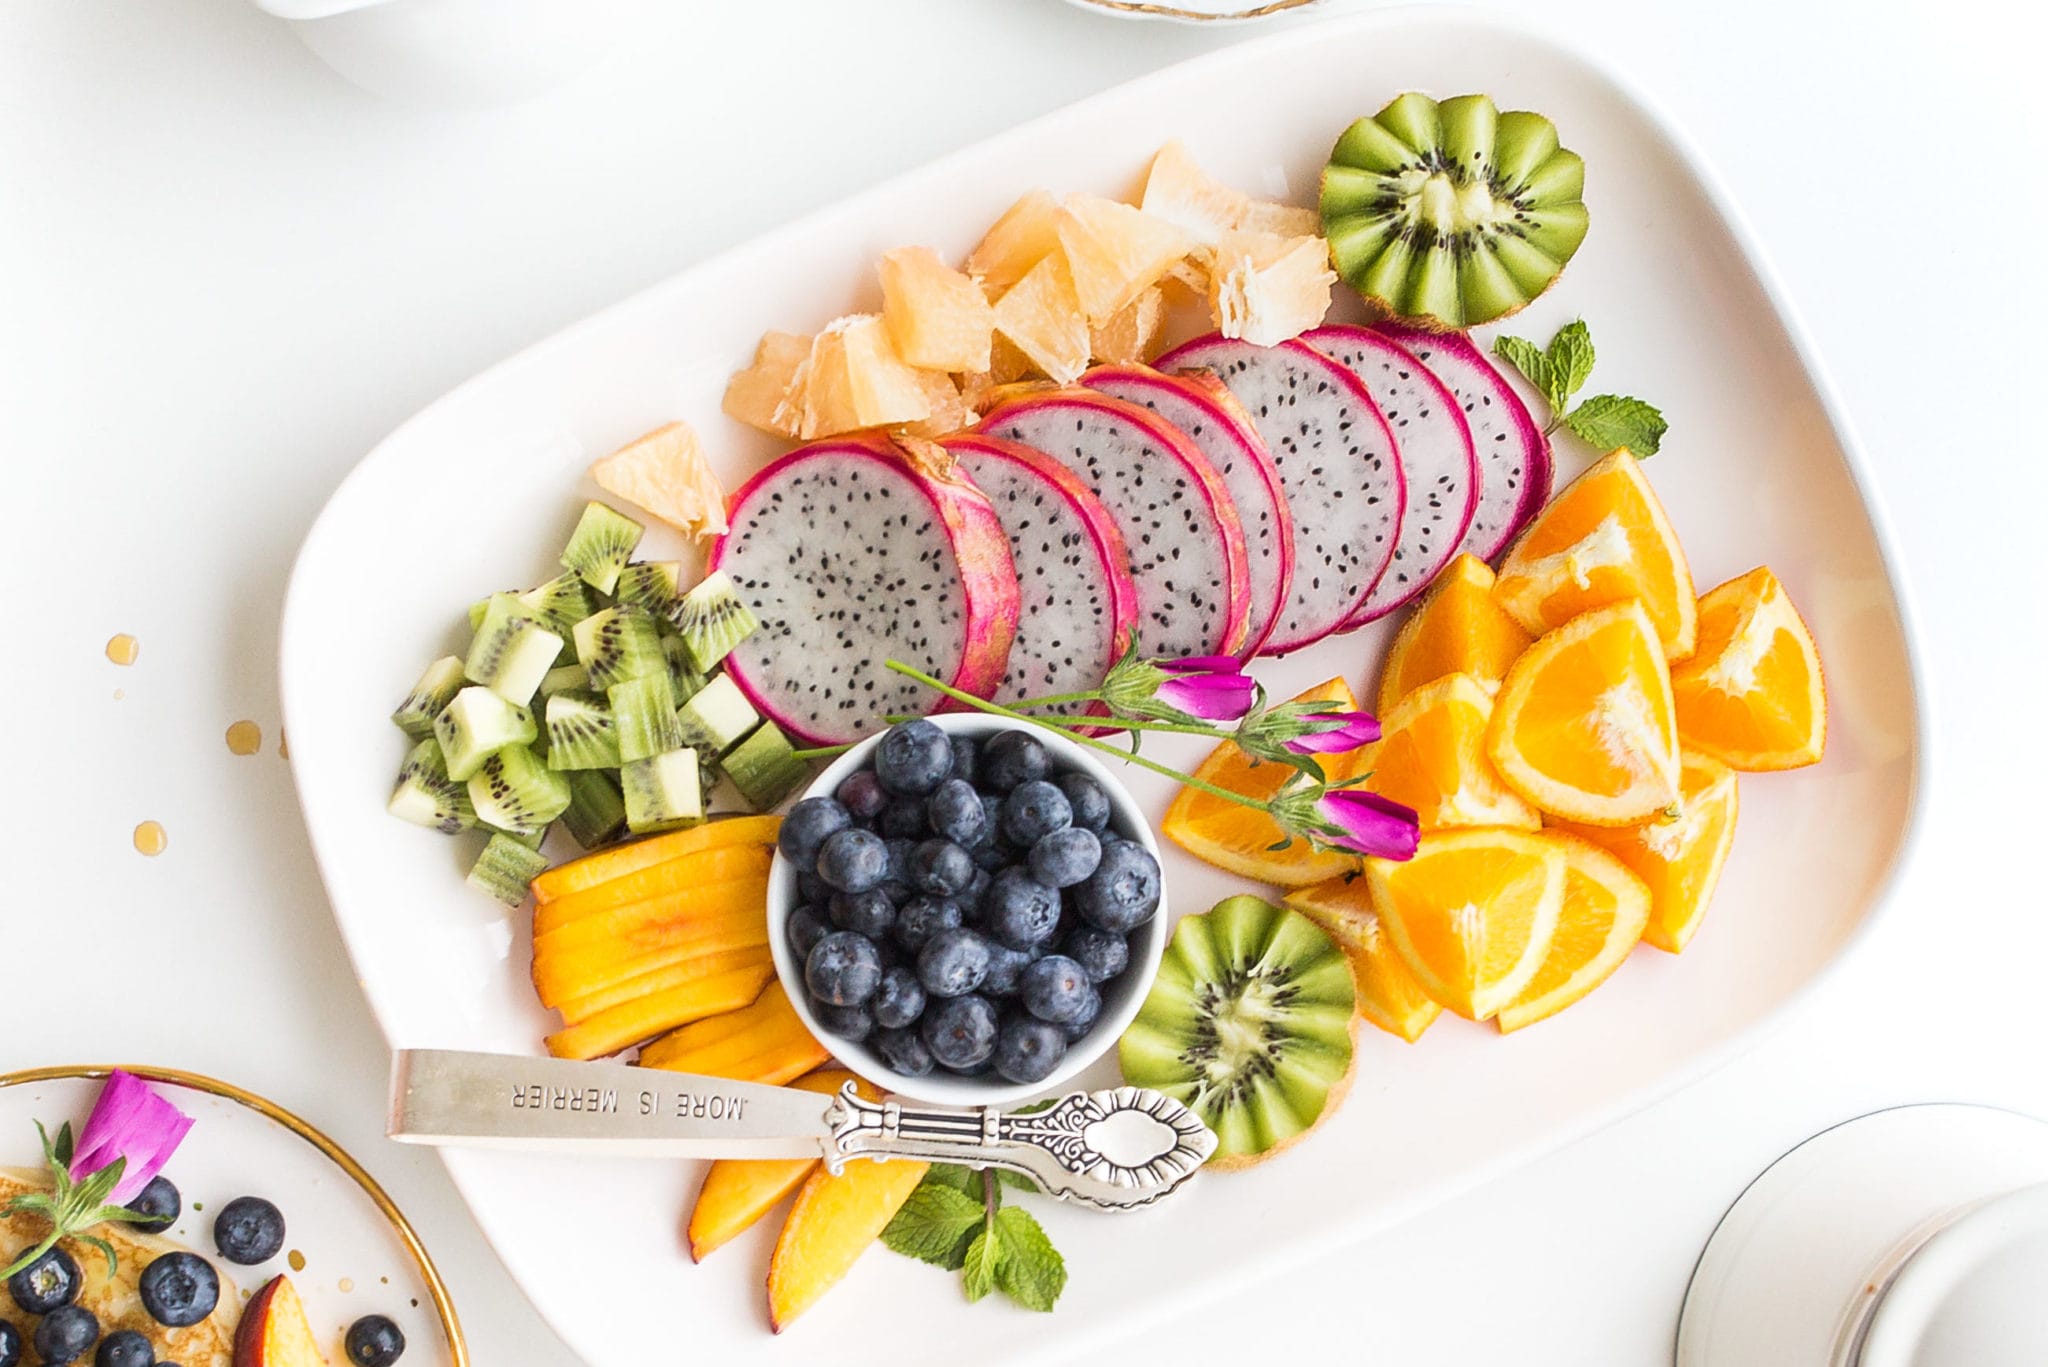 A vibrant fruit platter with sliced kiwi, dragon fruit, oranges, and blueberries, garnished with mint leaves on a white background.